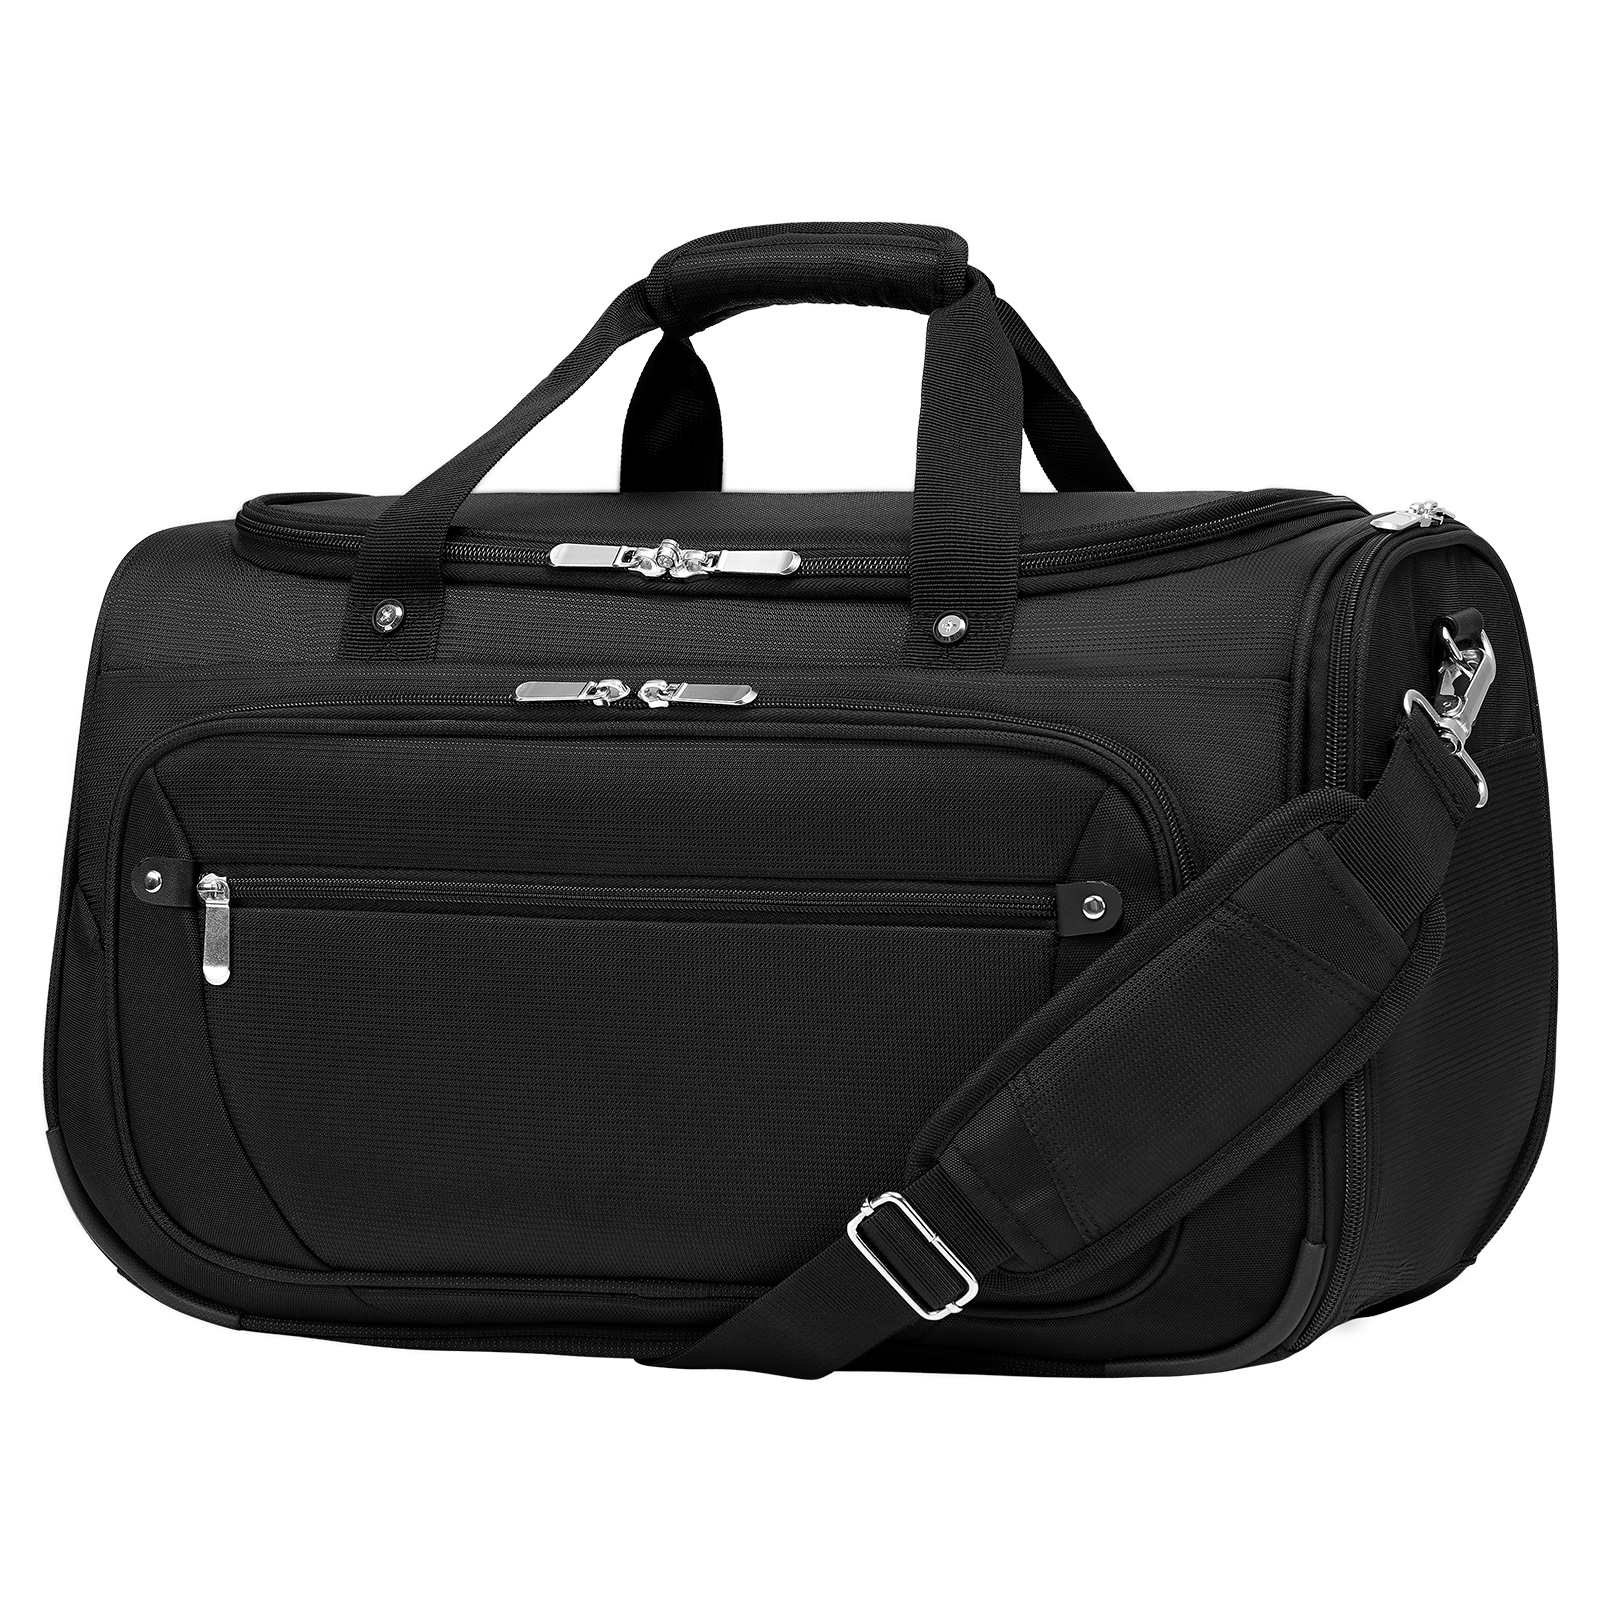 Coolife Travel Duffel Bag Carry-On Travel Tote with Adjustable Strap Overnight Weekender Bag Softside Lightweight Underseat Bag